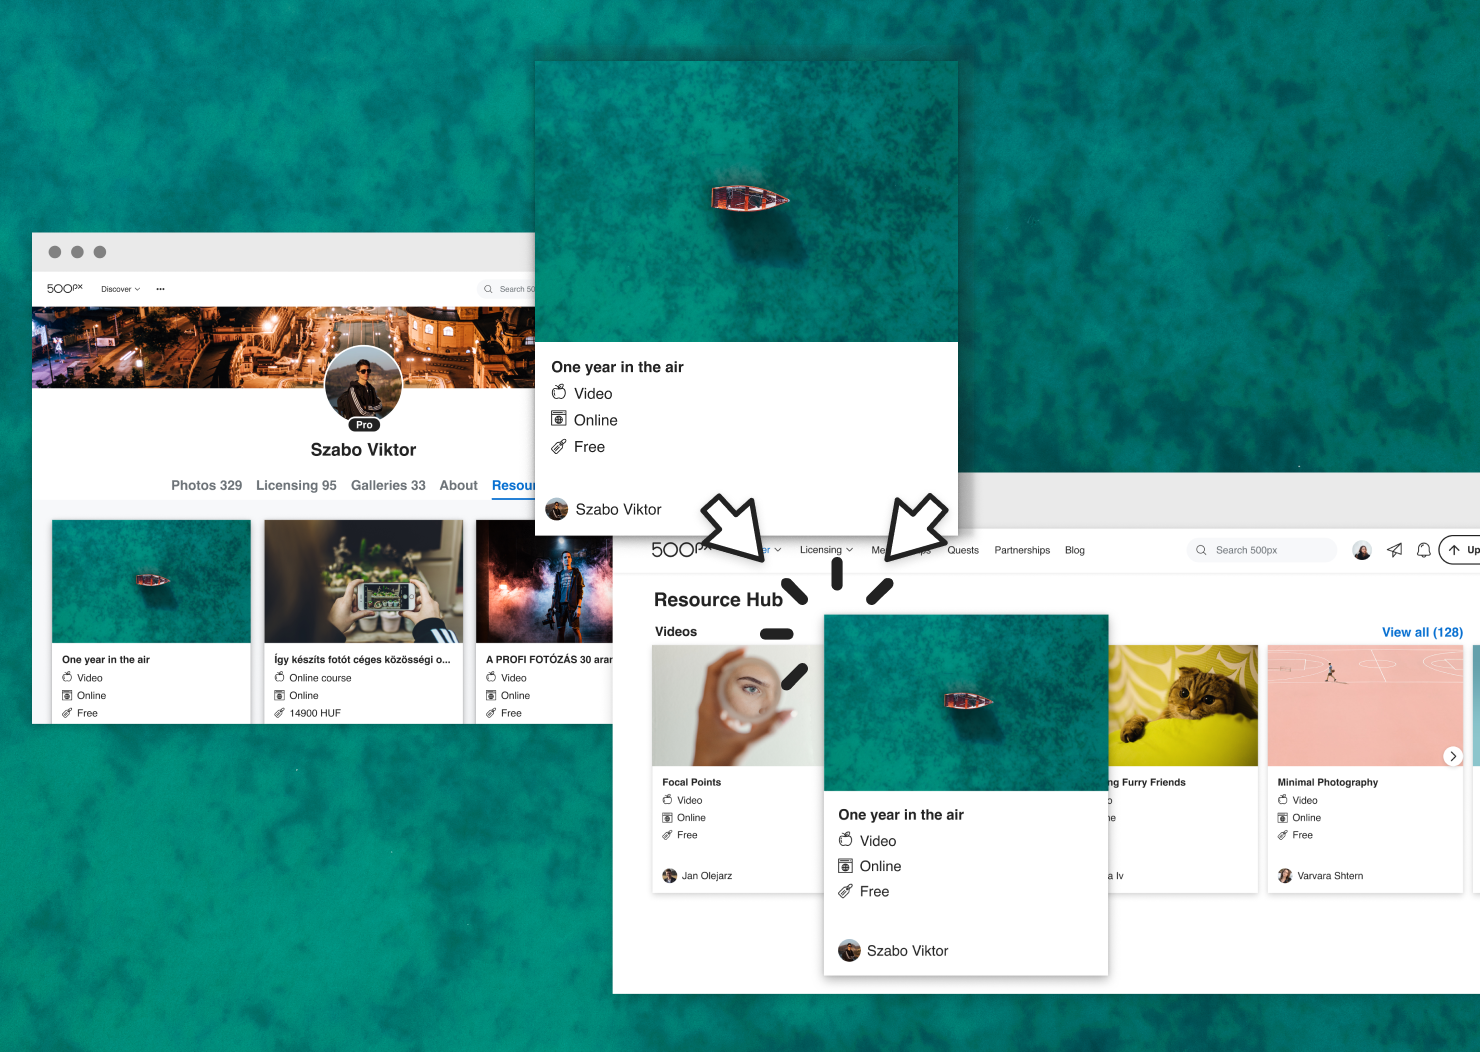 A view of recommended content in the new 500px Home Feed